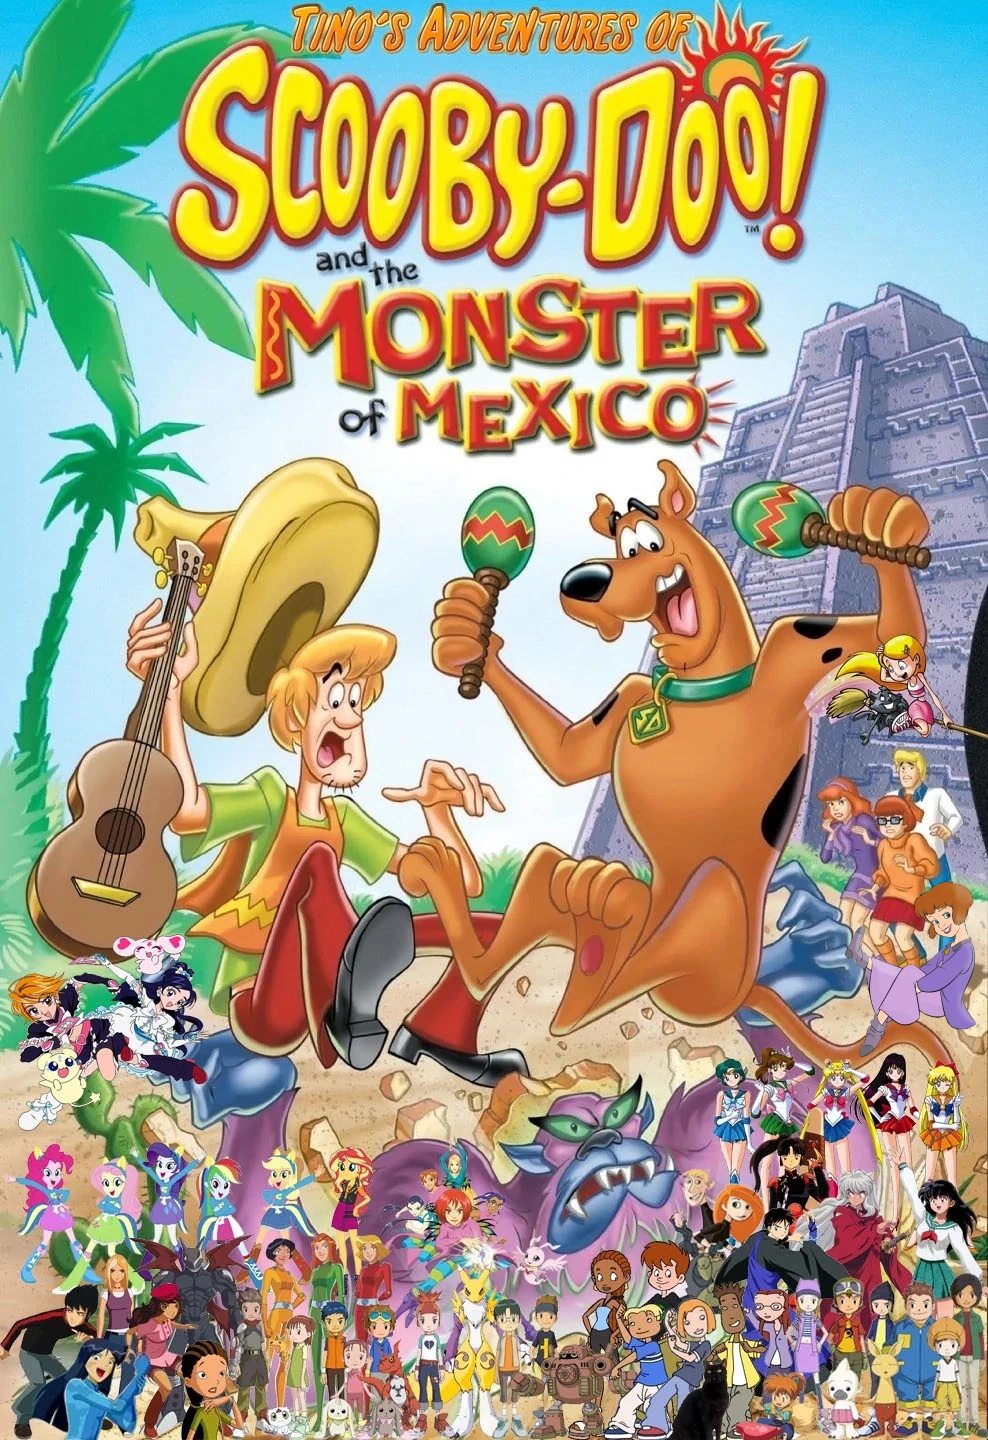 Tino's Adventures of Scooby-Doo! and the Monster of Mexico ...